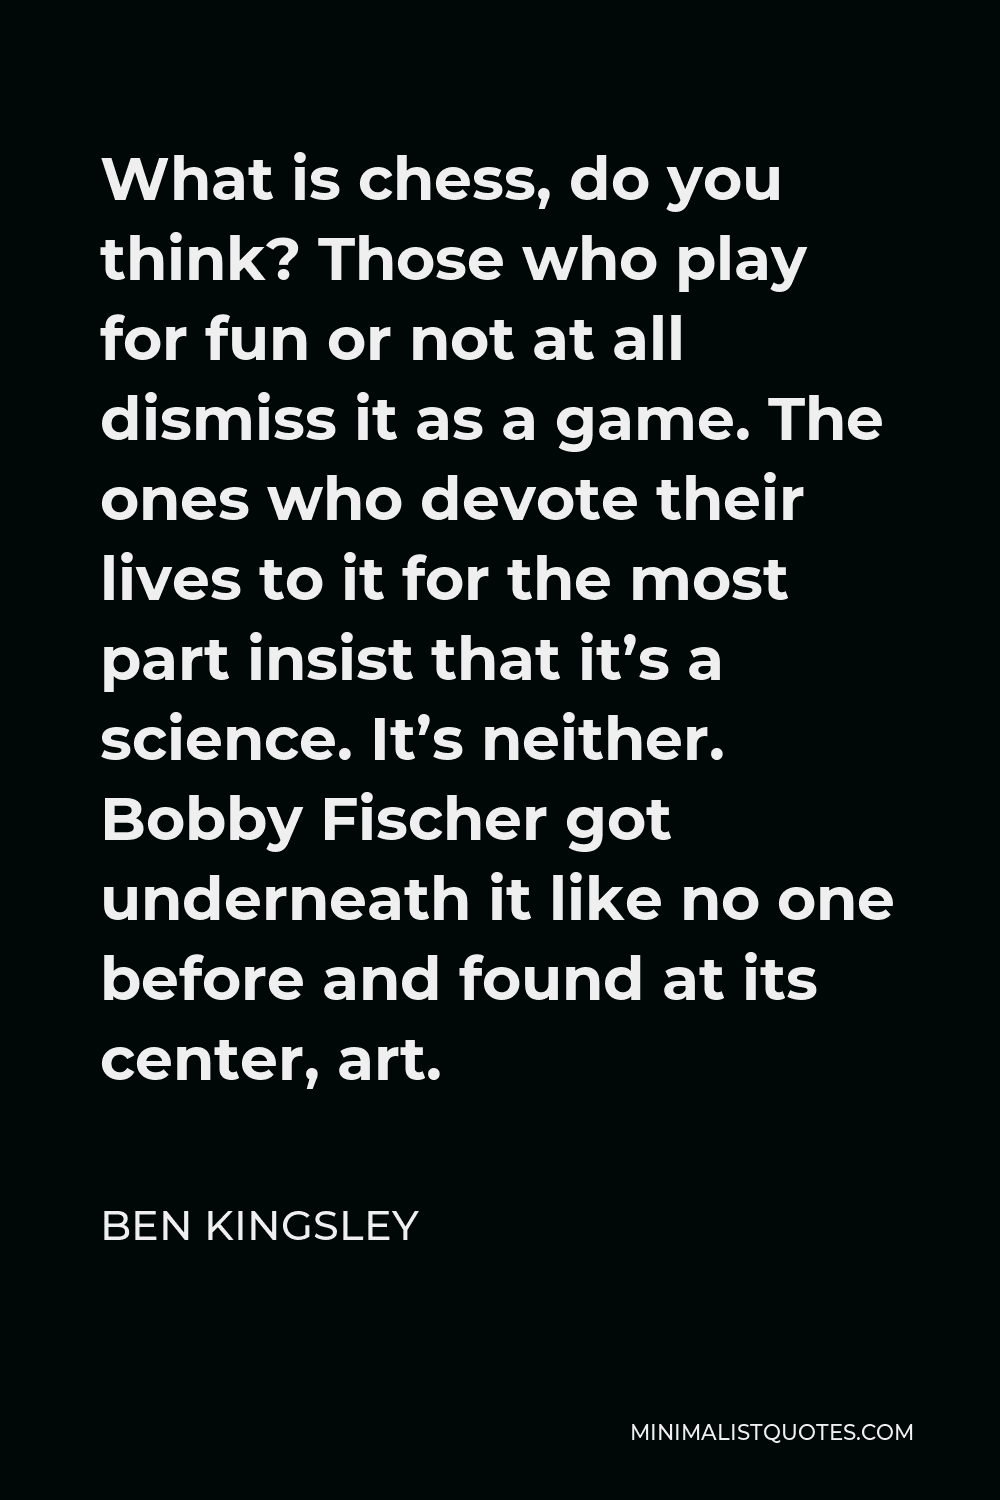 Ben Kingsley Quote - What is chess, do you think? Those who play for fun or not at all dismiss it as a game. The ones who devote their lives to it for the most part insist that it’s a science. It’s neither. Bobby Fischer got underneath it like no one before and found at its center, art.